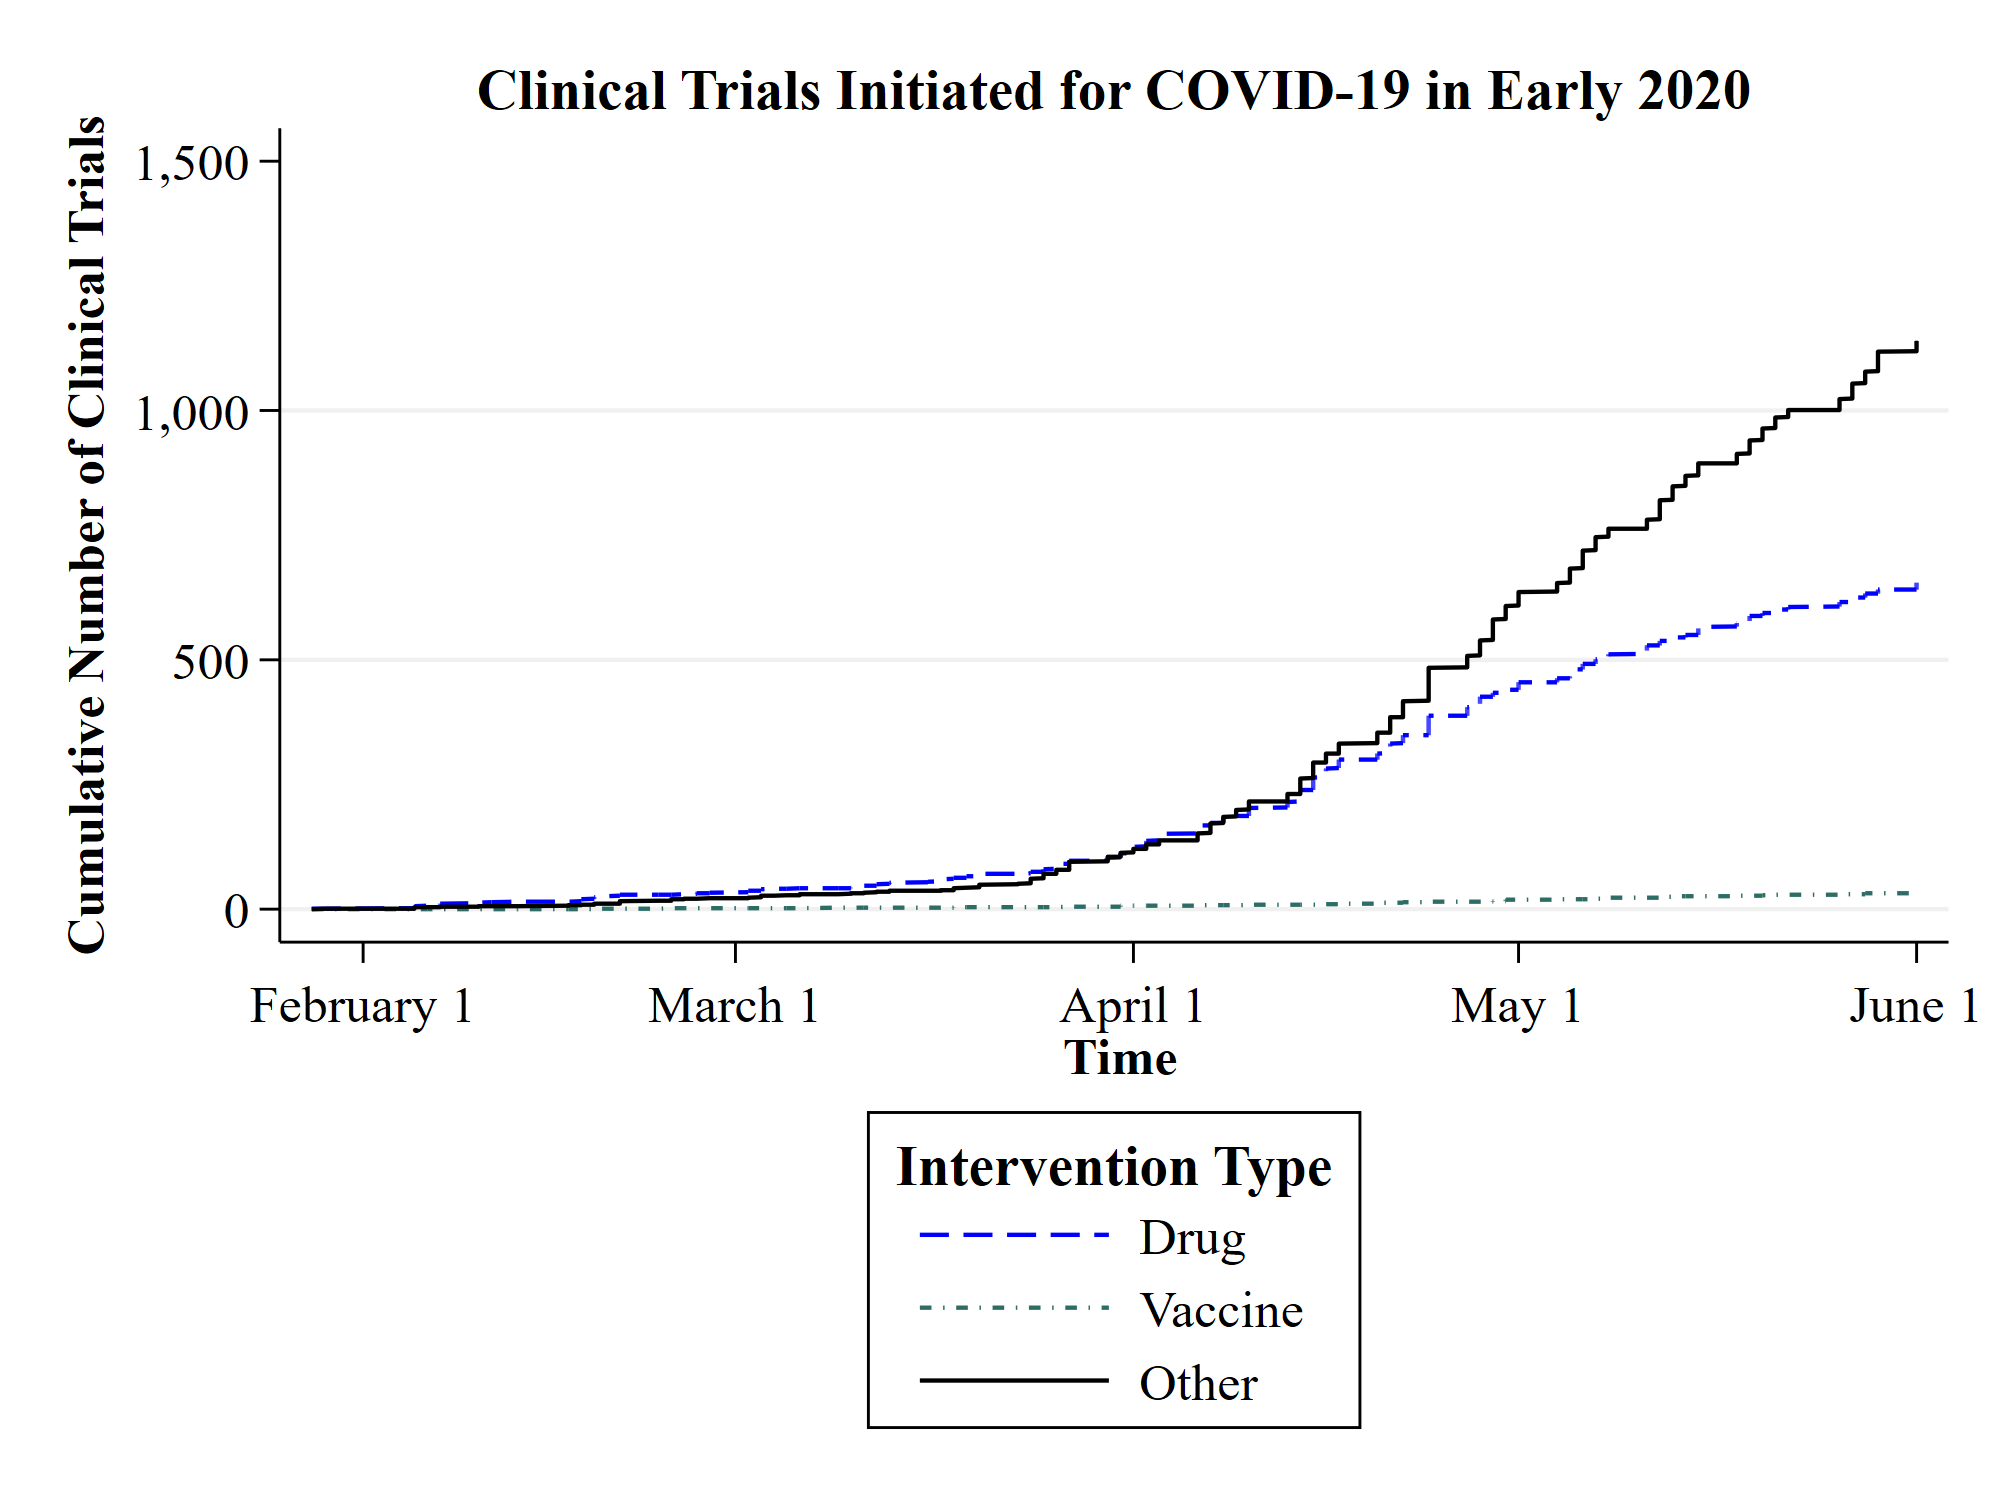 clinical trials initiated in the context of COVID-19